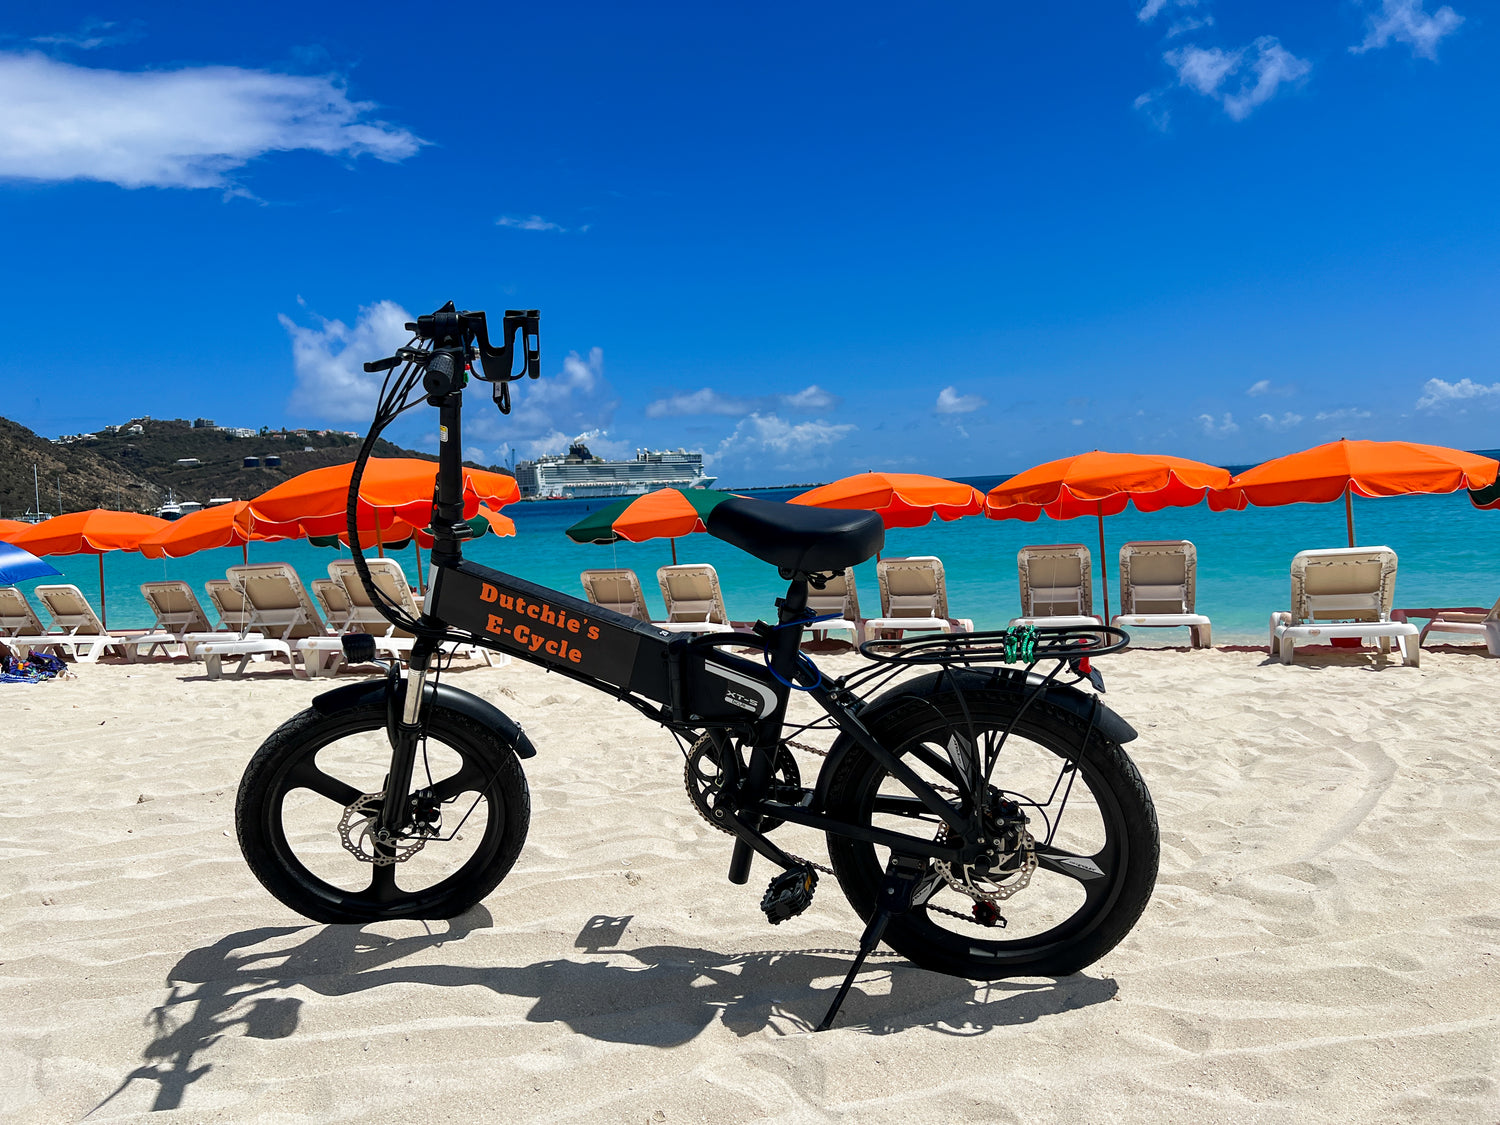 E-bike rental on beach in Sint Maarten with cruise ship in the background